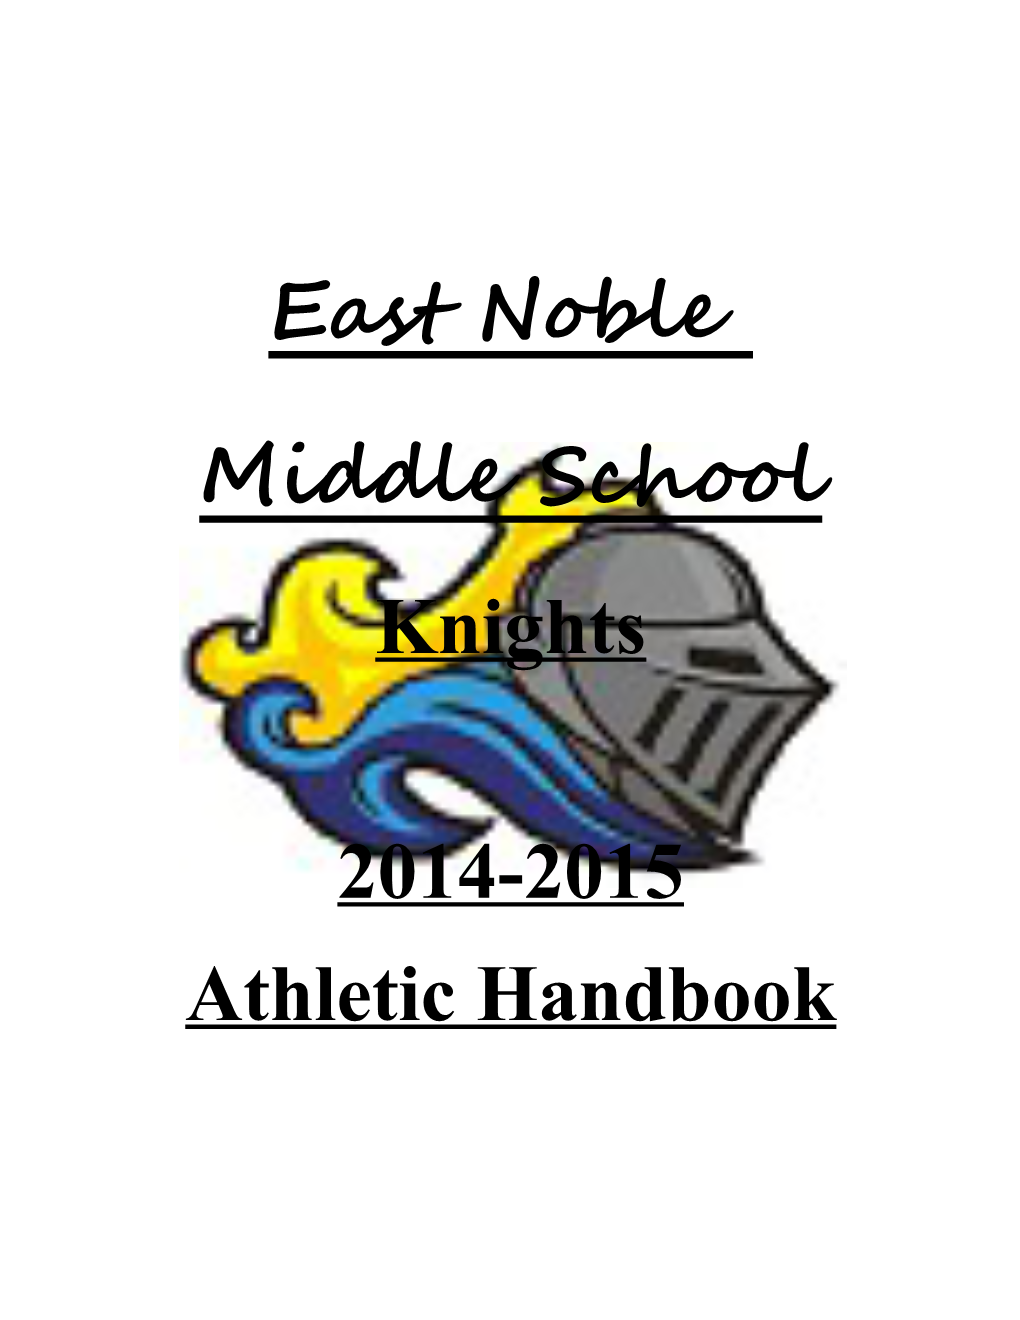 East Noble Middle School